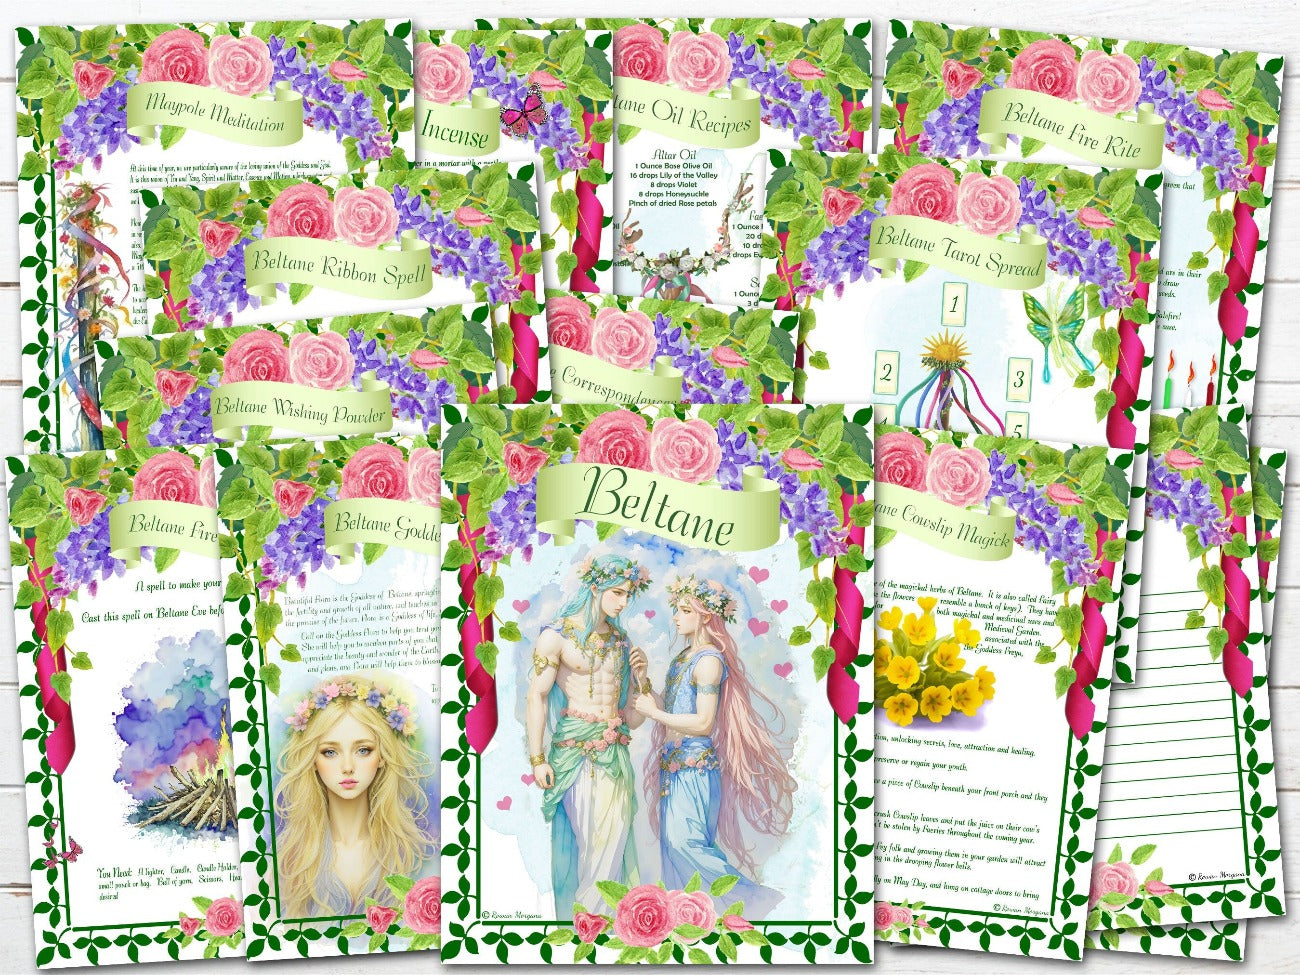 Beltane Bundle Pages, Wicca Witch Seaonal Celebrations, Baby Witch, Wheel of the Year, Sabbat Grimoire, Sabbat Traditions - Morgana Magick Spell